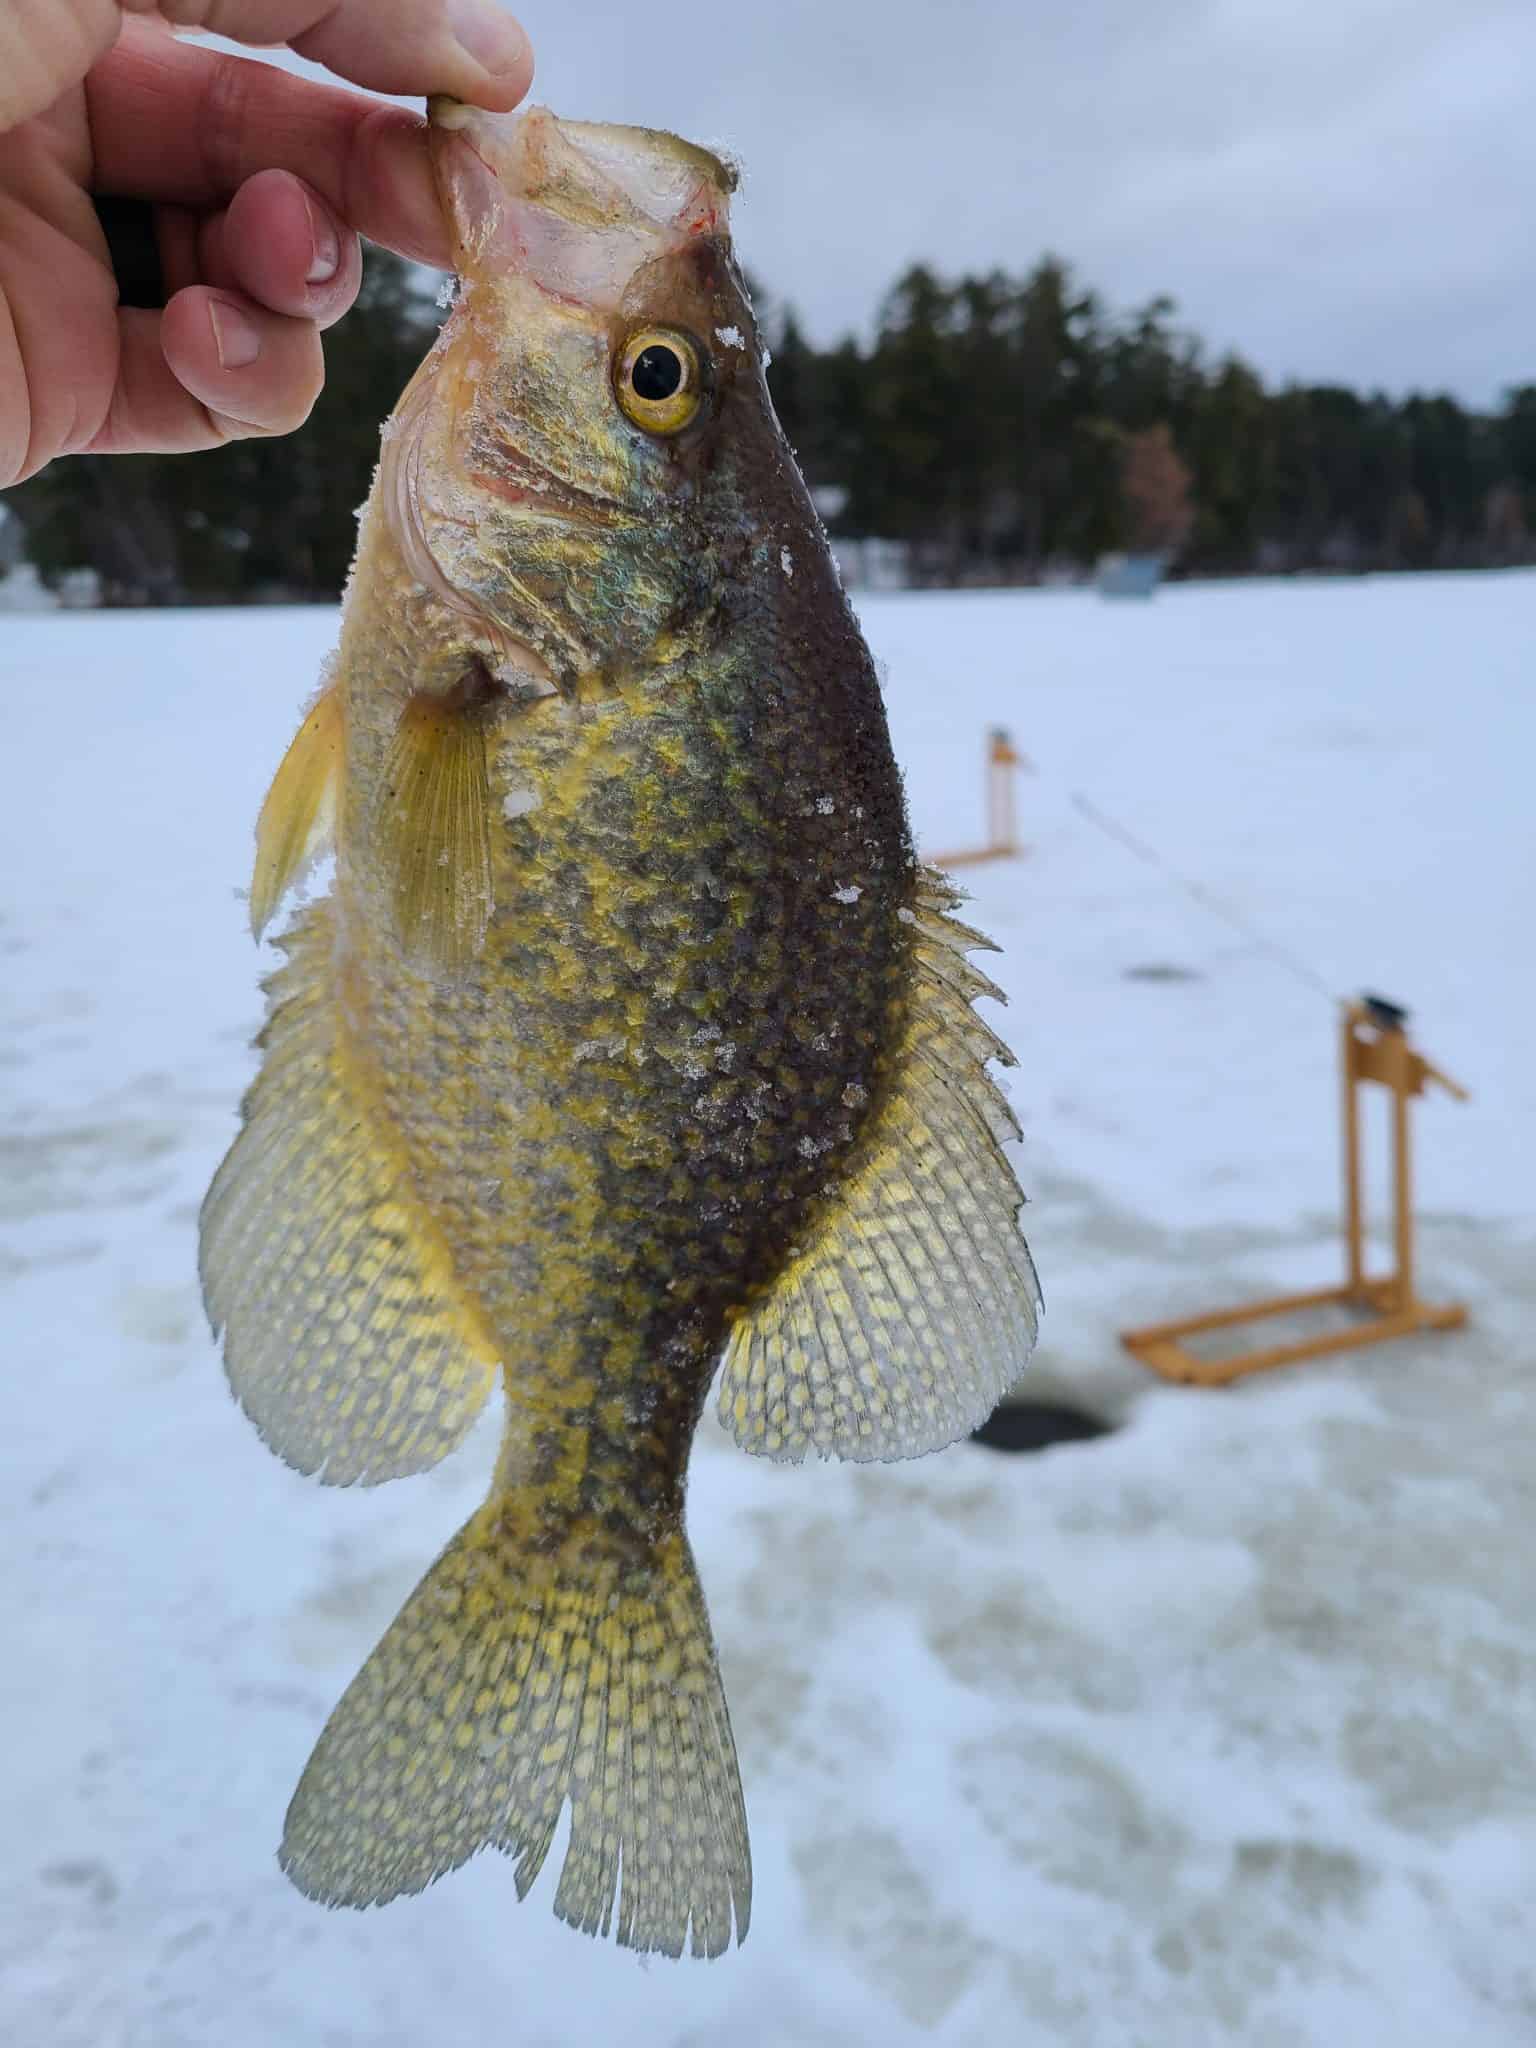 Fishing Report: The bite is slow in 2021